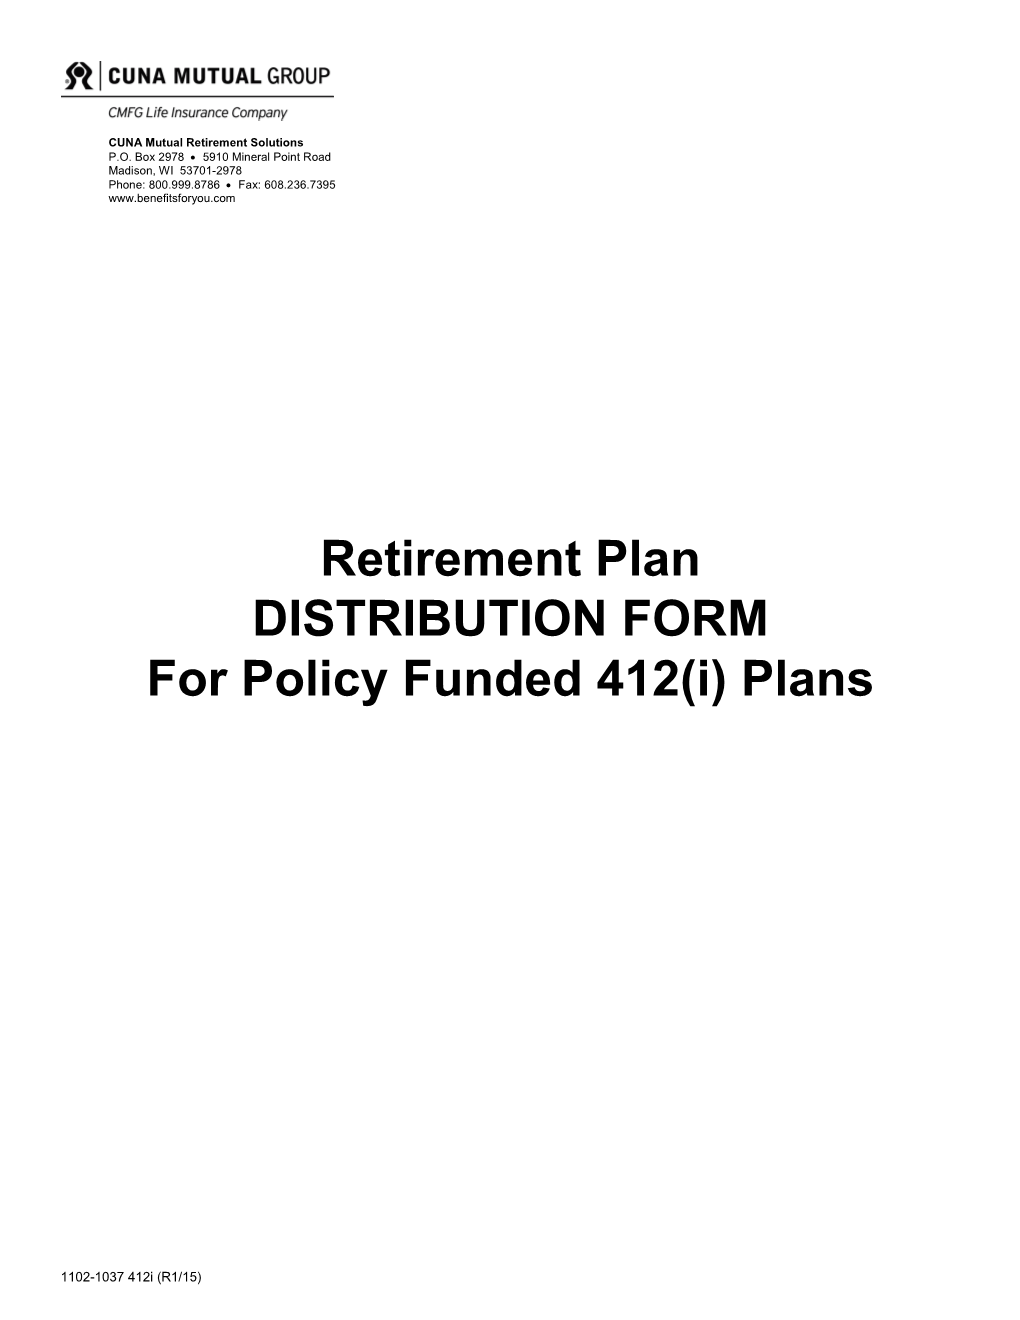 Retirement Plan DISTRIBUTION FORM for Policy Funded 412(I) Plans